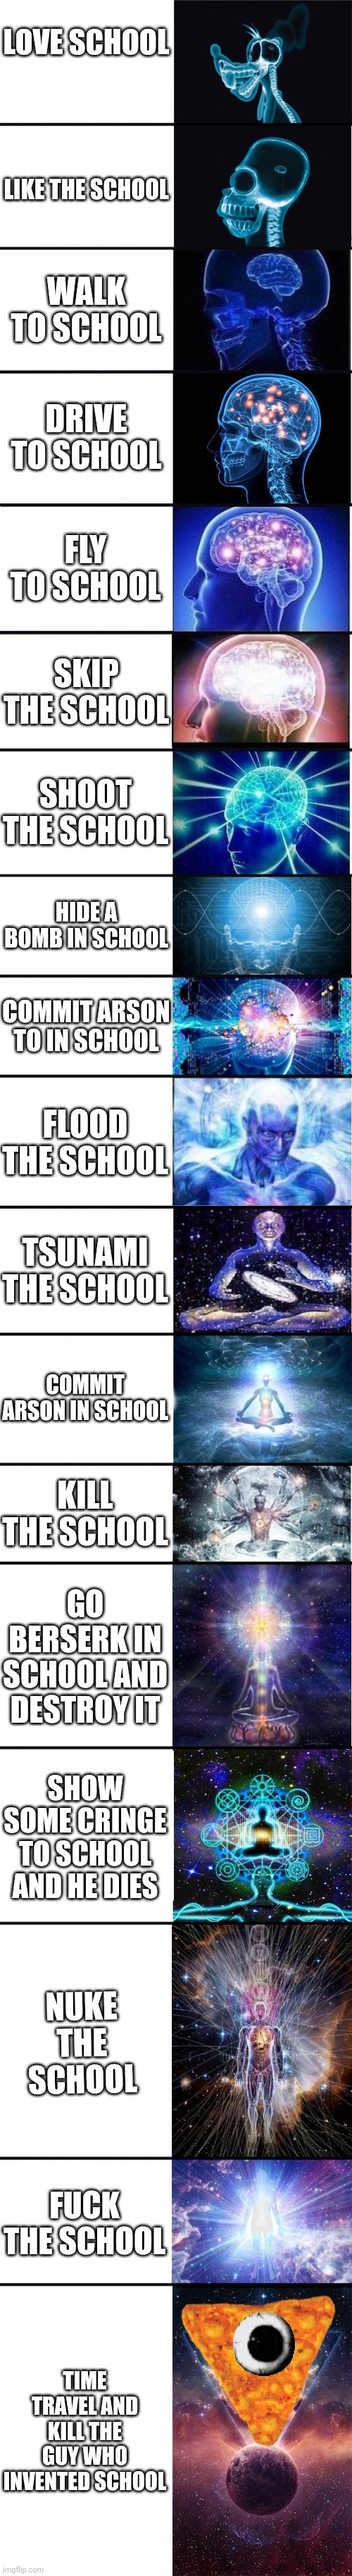 expanding brain: 9001 | LOVE SCHOOL LIKE THE SCHOOL WALK TO SCHOOL DRIVE TO SCHOOL FLY TO SCHOOL SKIP THE SCHOOL SHOOT THE SCHOOL HIDE A BOMB IN SCHOOL COMMIT ARSON | image tagged in expanding brain 9001 | made w/ Imgflip meme maker